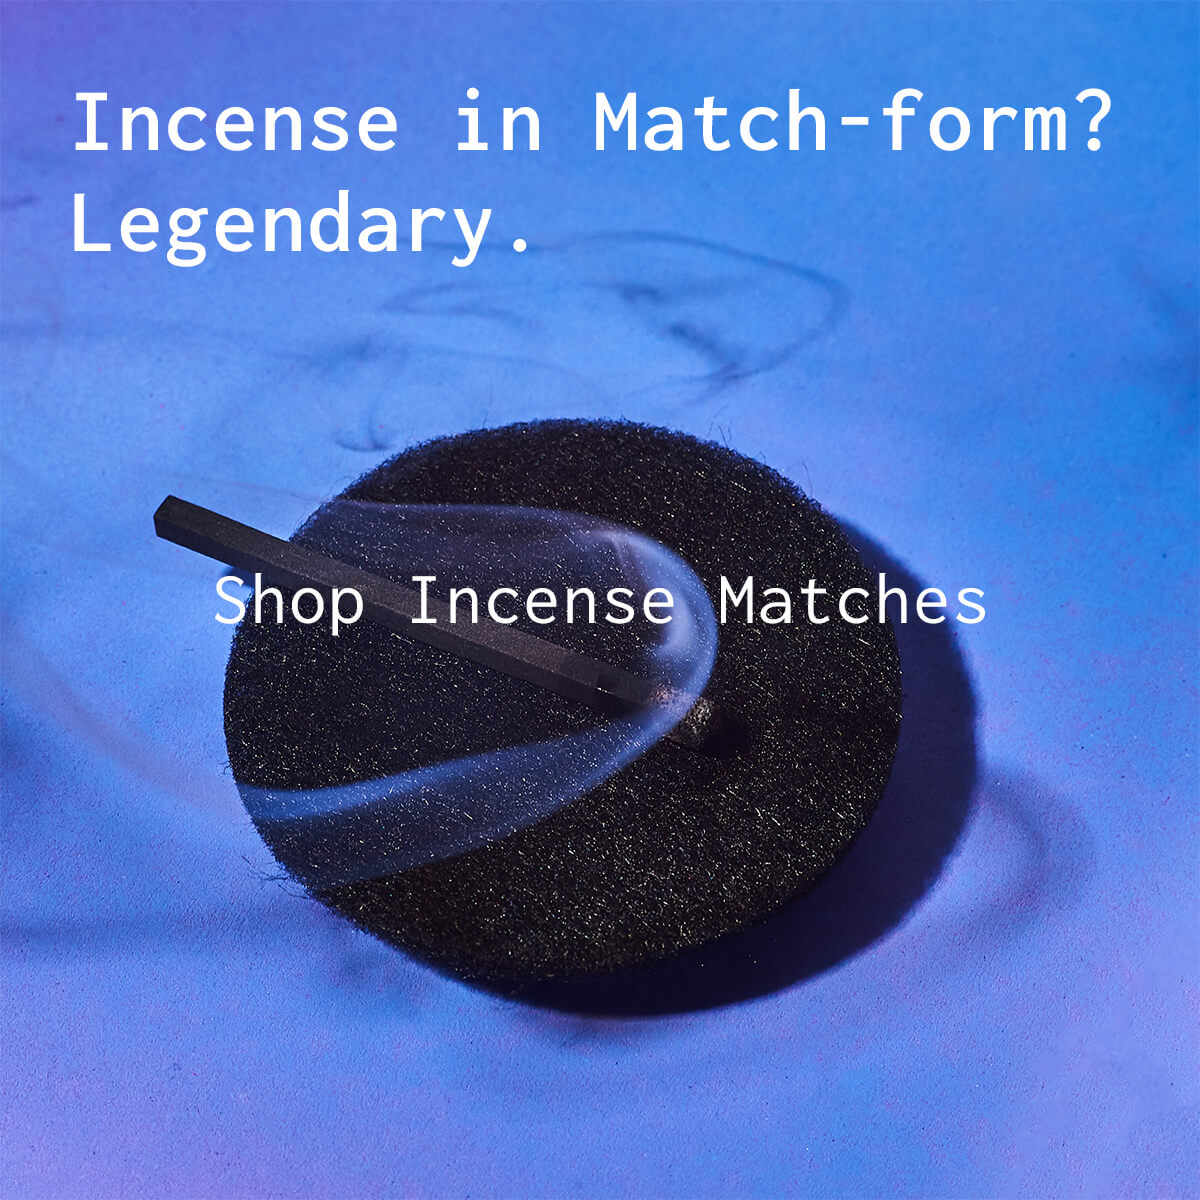 collection matches-and-lighters-smoke-shop/incense-matches